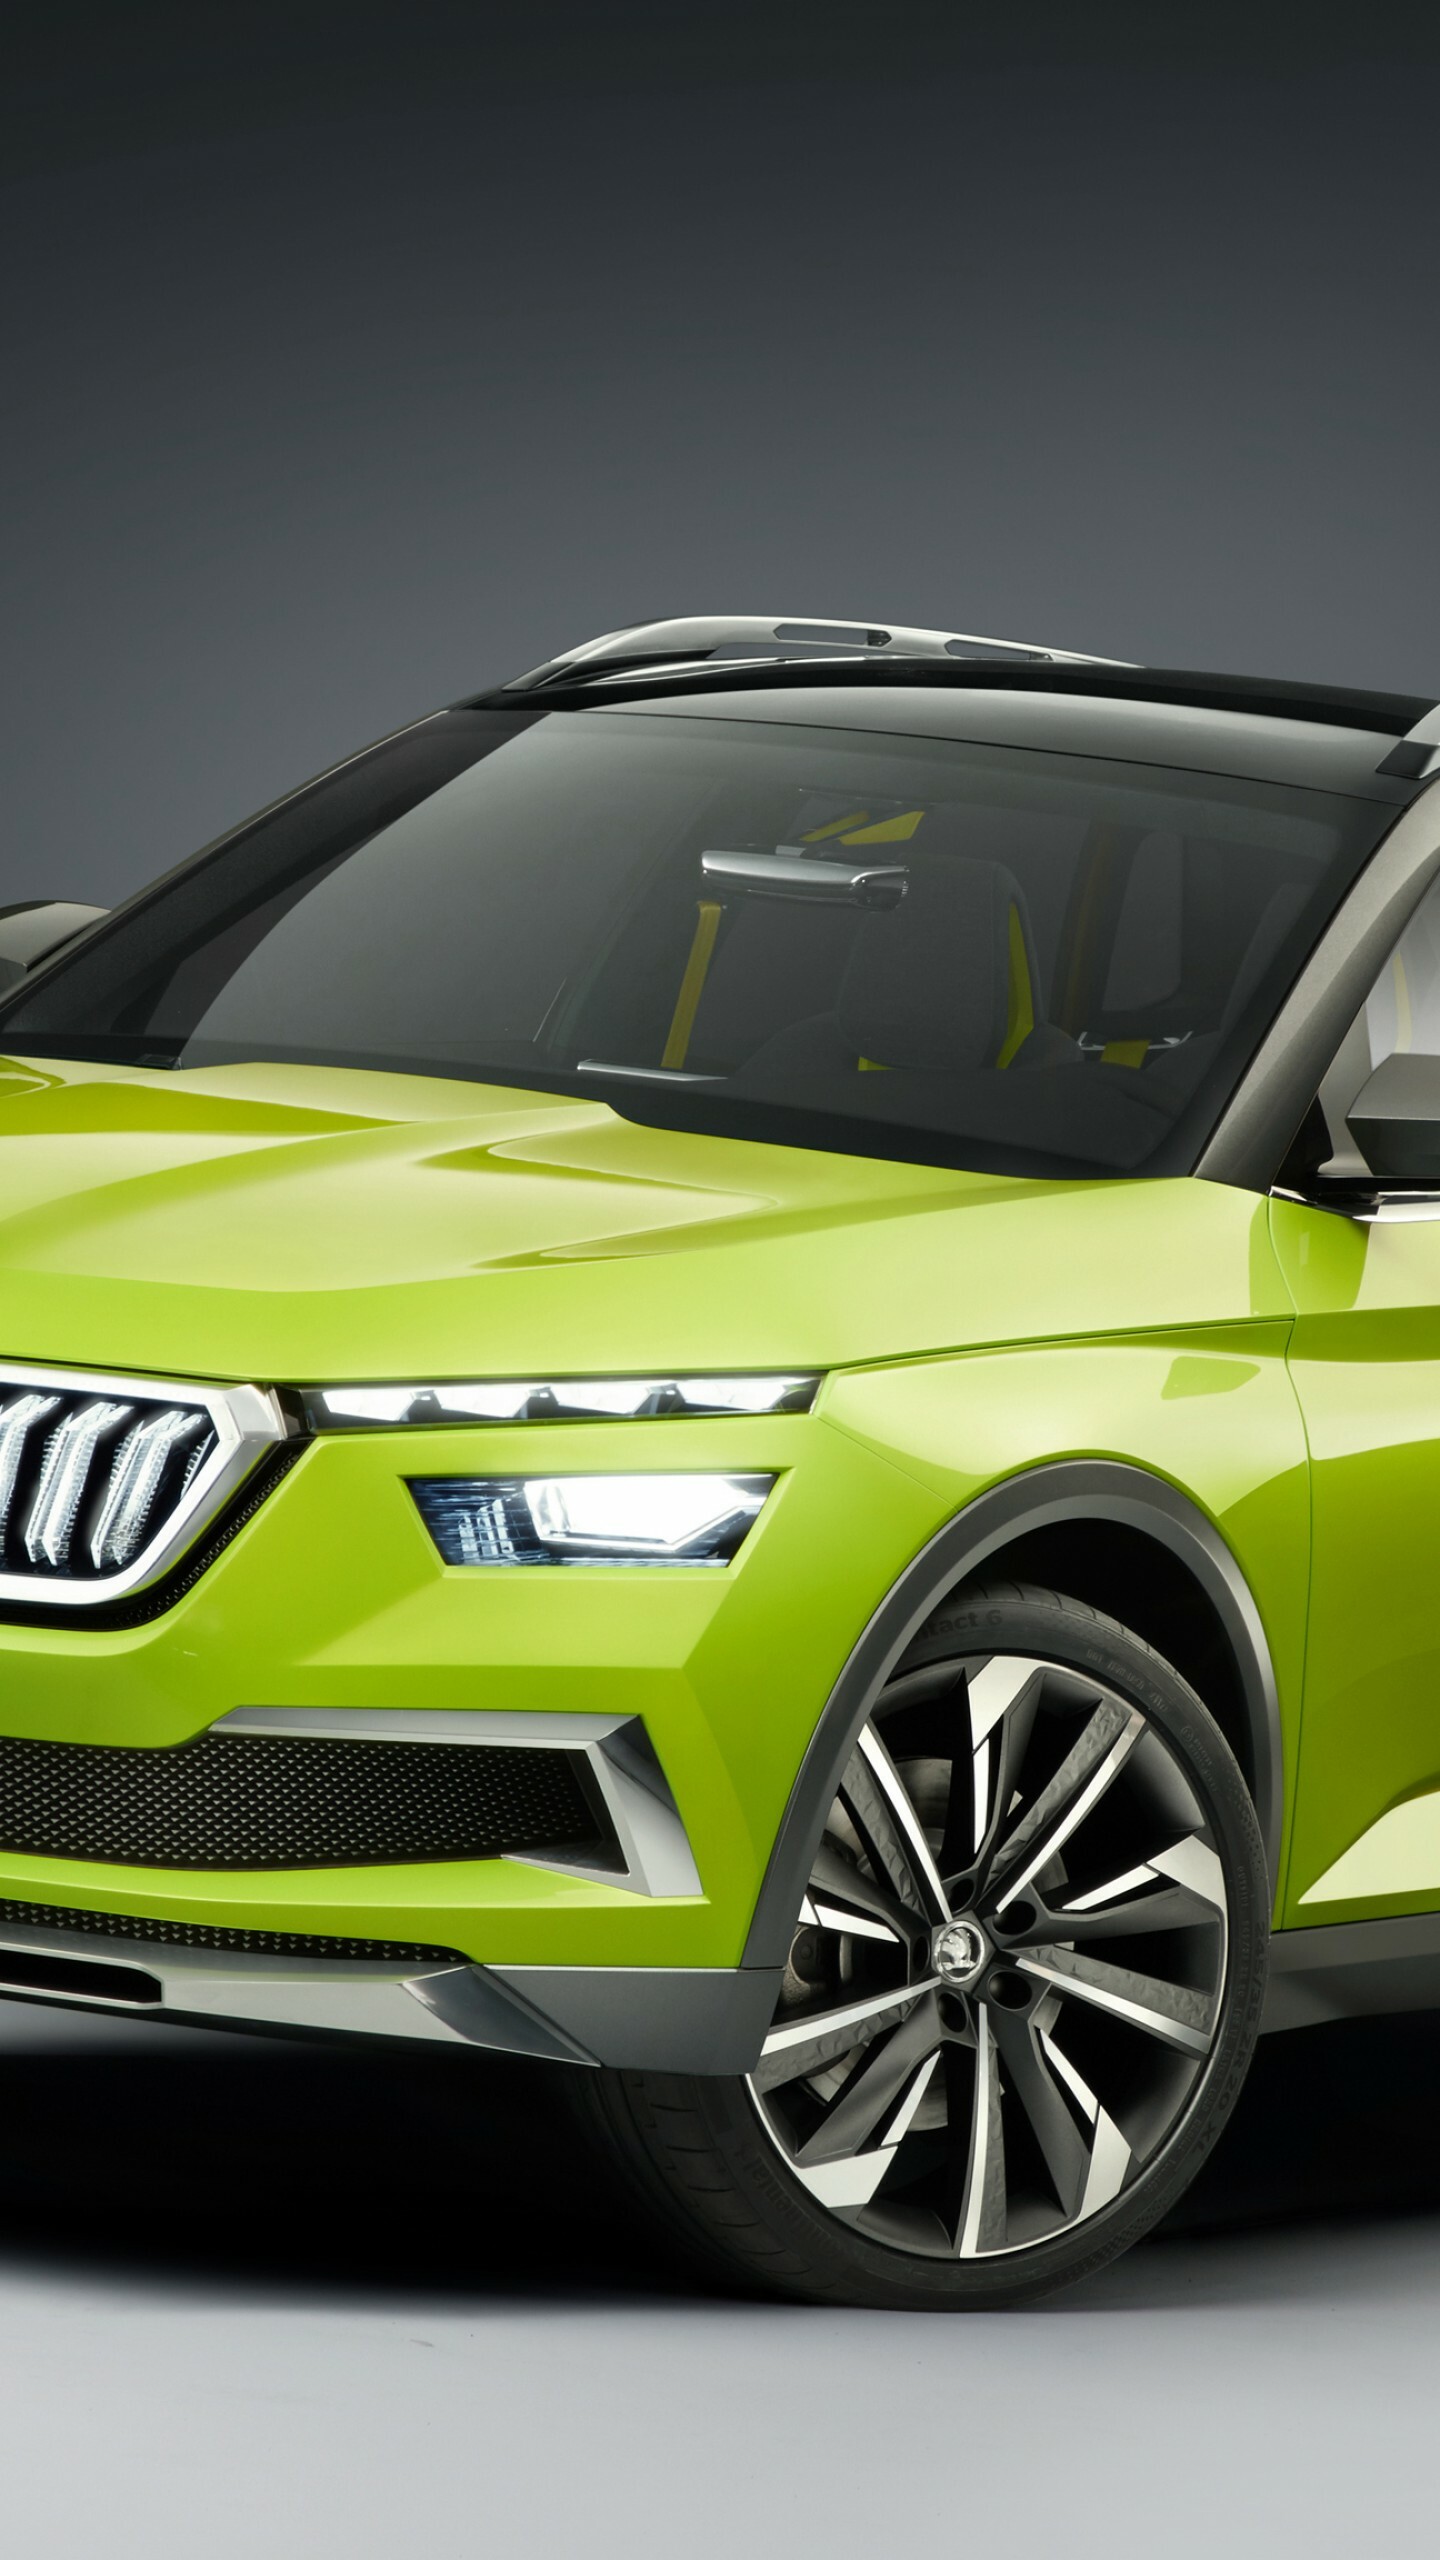 Skoda: Vision X, Electric car, Featuring an advanced hybrid drive combining electricity and CNG for a ride. 1440x2560 HD Wallpaper.